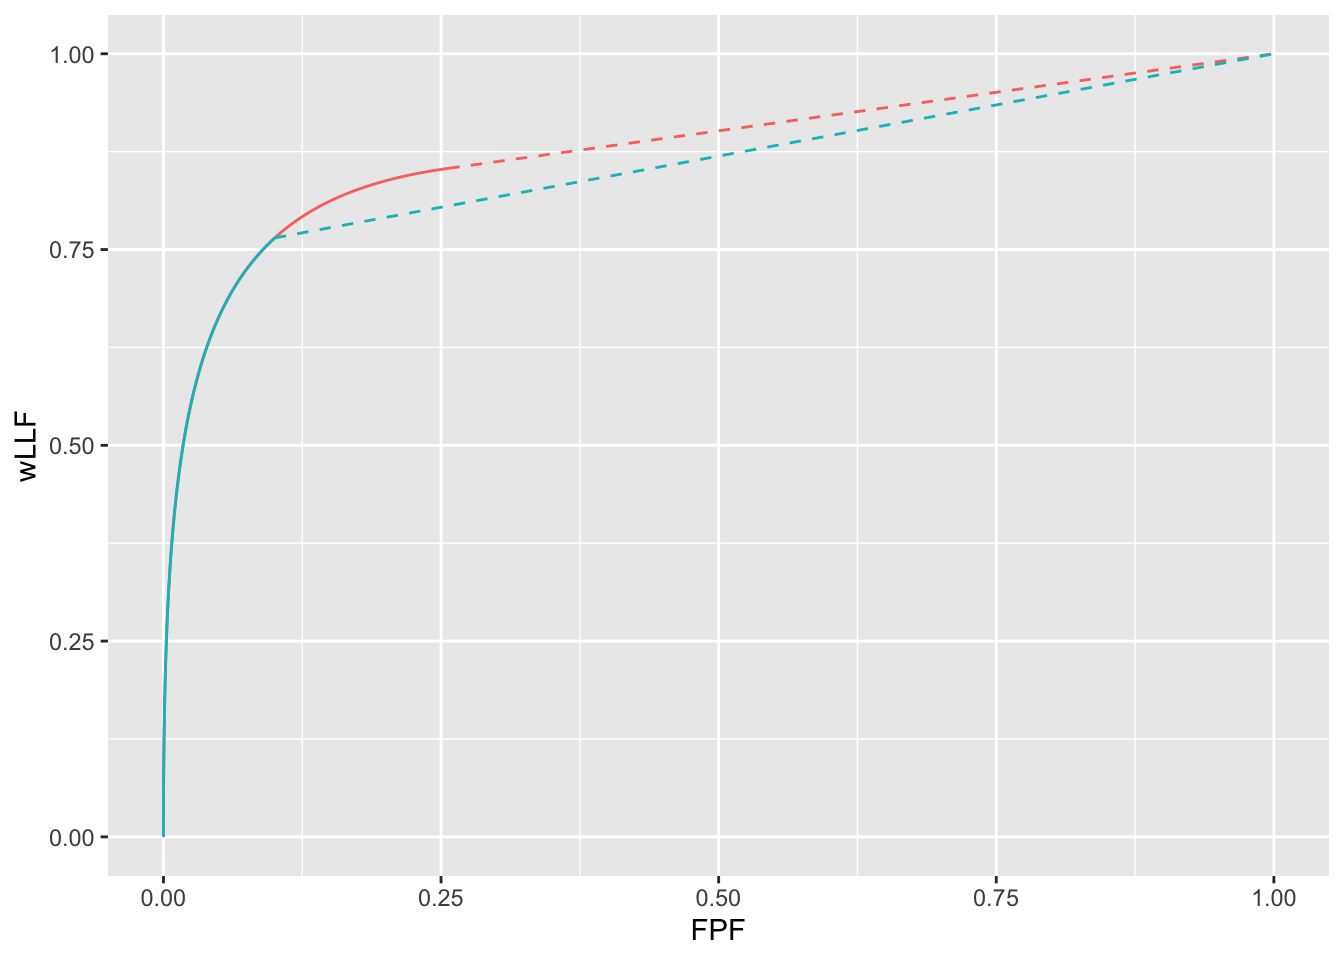 wAFROC curves for wAFROC-AUC and Youden-index based optimizations: both curves correspond to $\mu = 2$, $\nu = 1$ and $\lambda = 1$. The optimal reporting theshold $\zeta_1$ is determined by the selected FOM. The red curve corresponds to FOM = wAFROC-AUC and the blue curve corresponds to FOM = Youden-index. The stricter reporting threshold found by the Youden-index based method sacrifices a considerable amount of area under the wAFROC.  The two wAFROC-AUCs are 0.880 and 0.856, respectively.